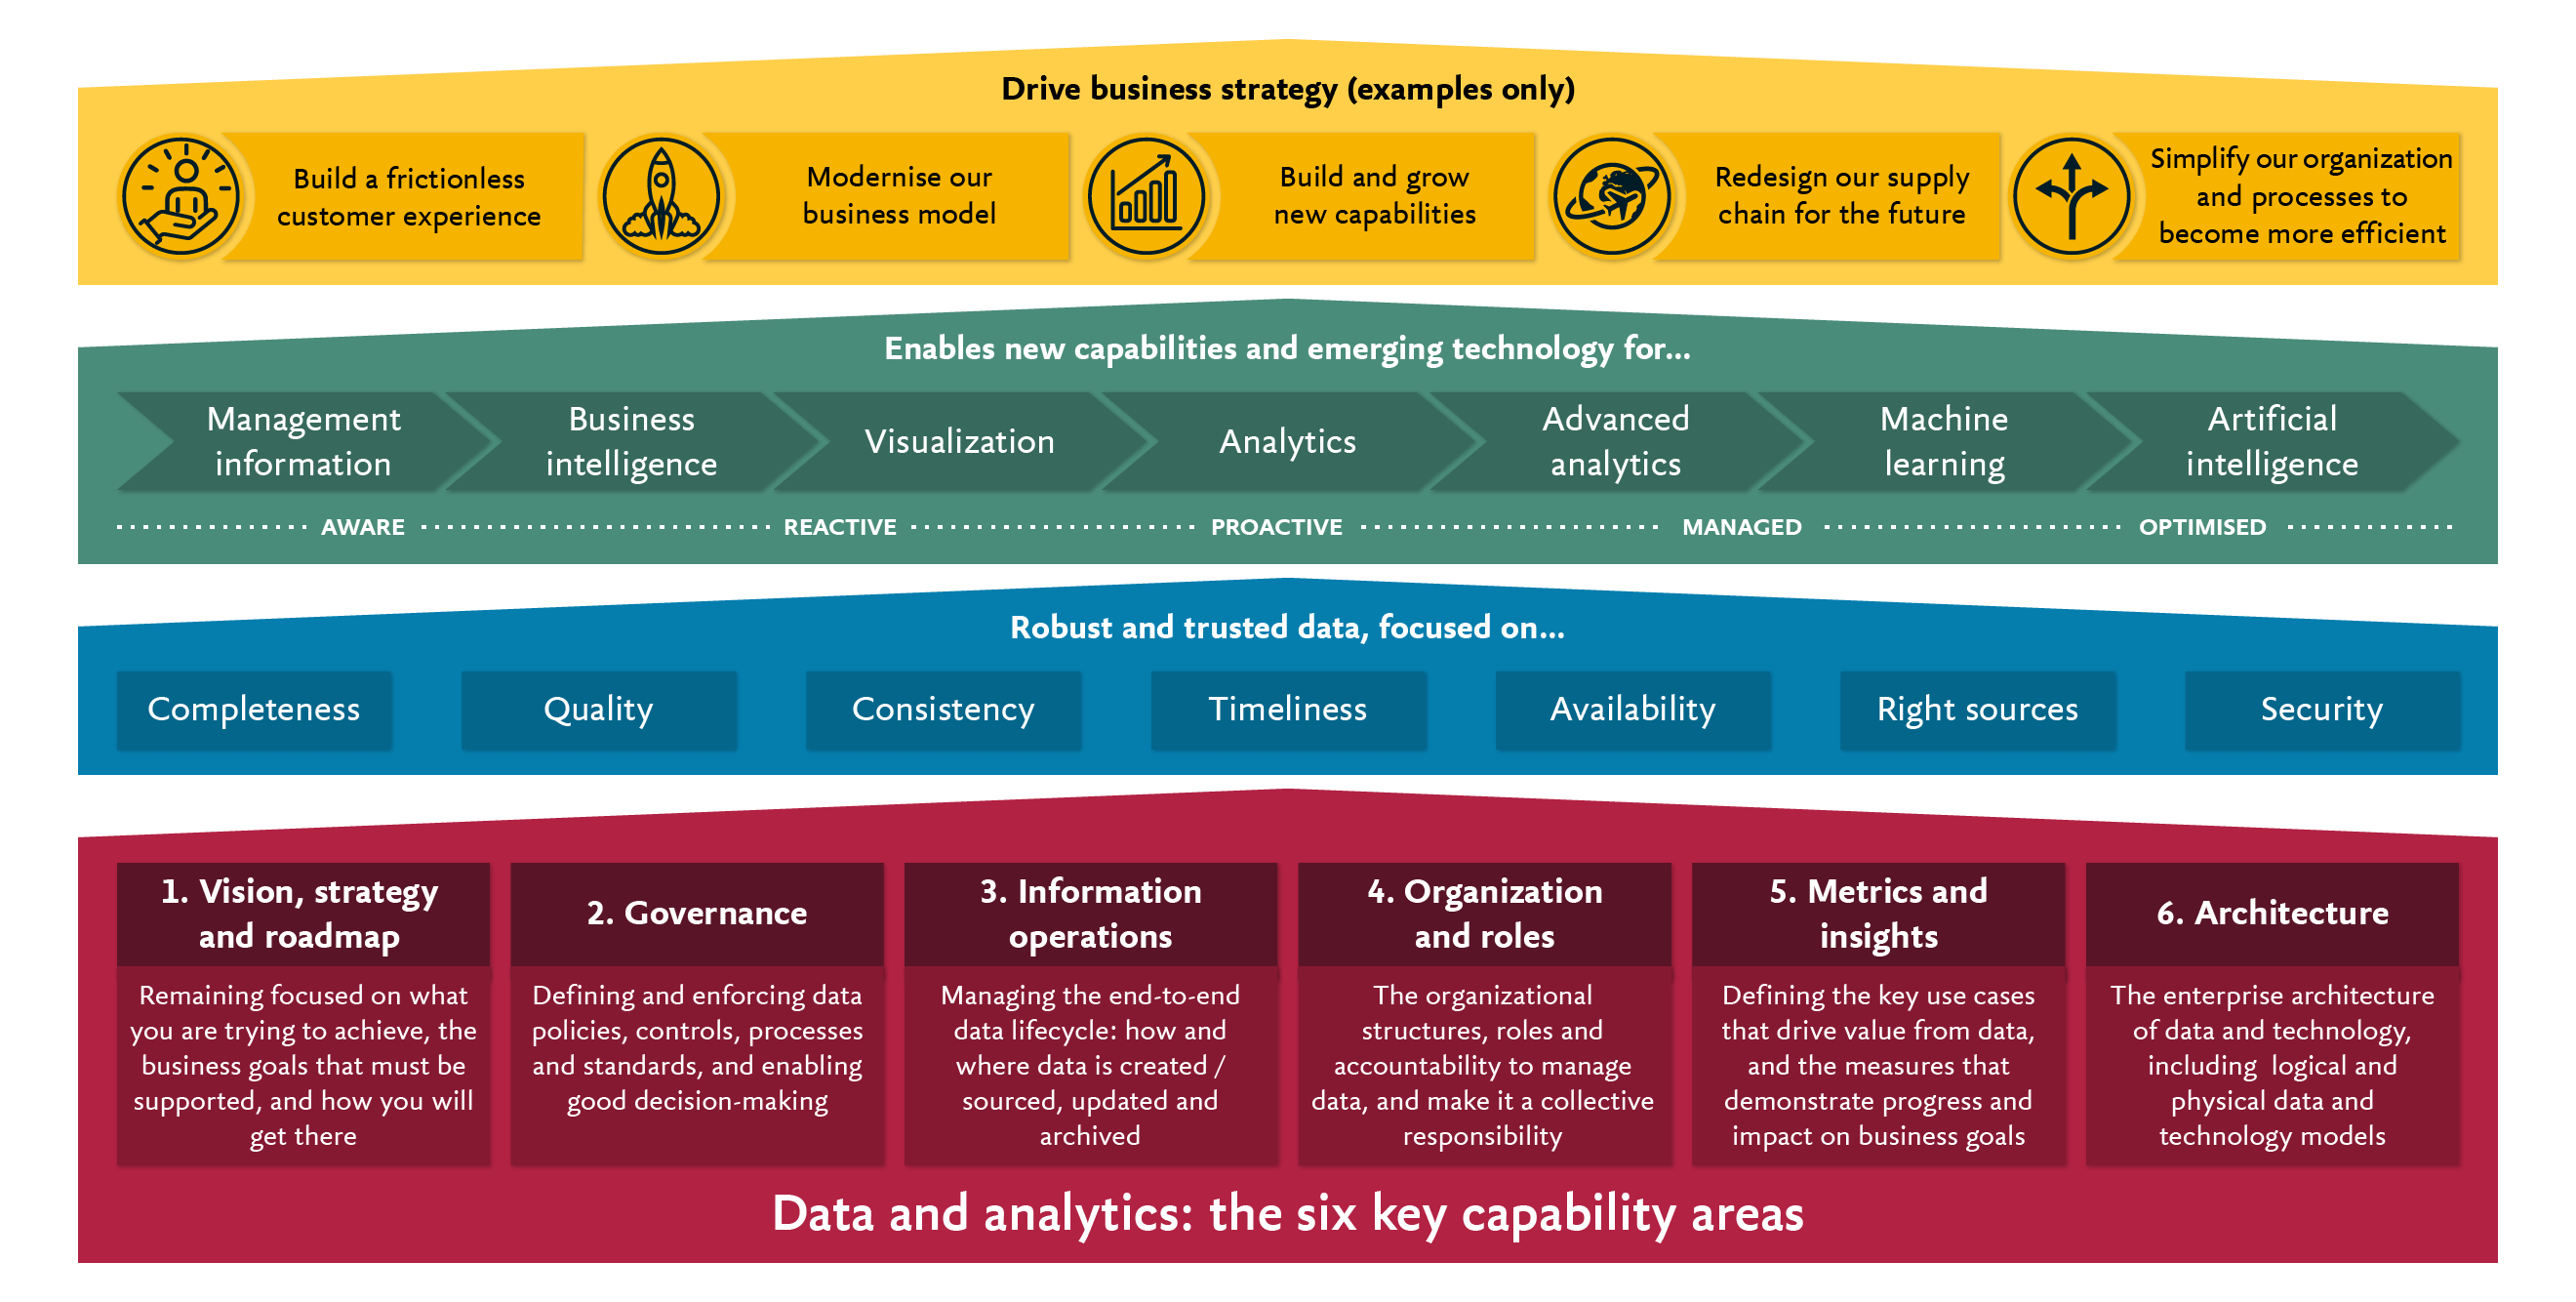 US-Data-and-analytics-the-six-key-capability-areas@2x-1.png